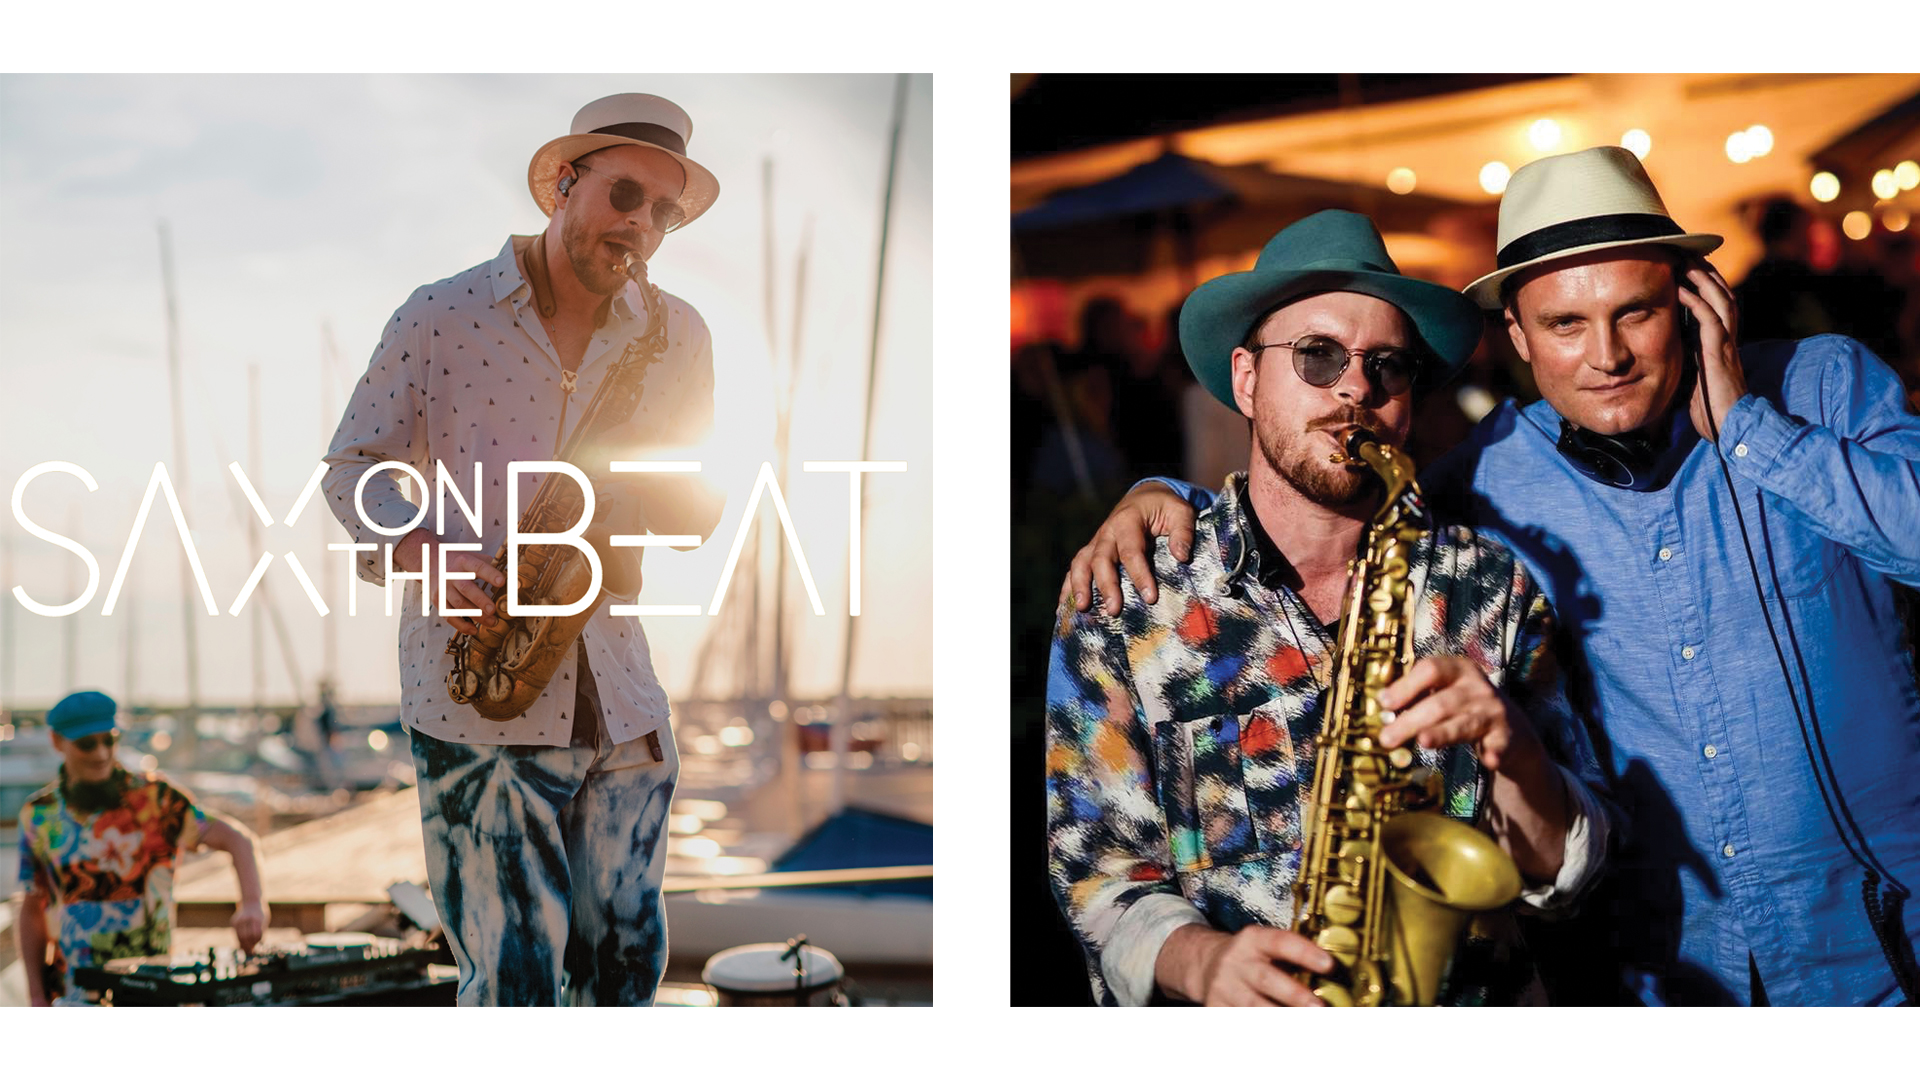 Sax on the Beat kommer till Buhres